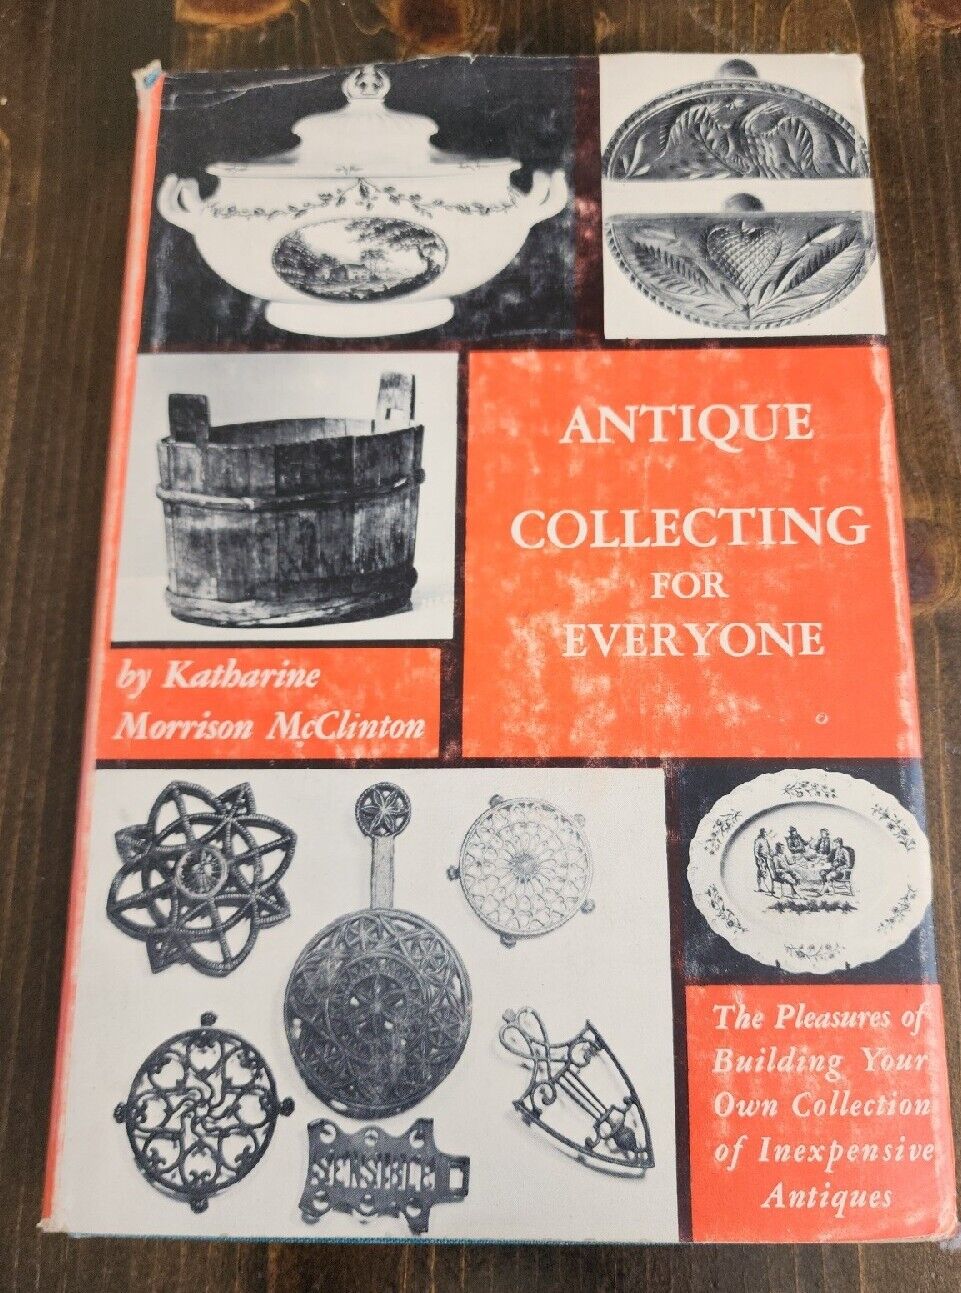 Antique Collecting For Everyone by Katharine Morrison McClinton 1951 HC/DJ